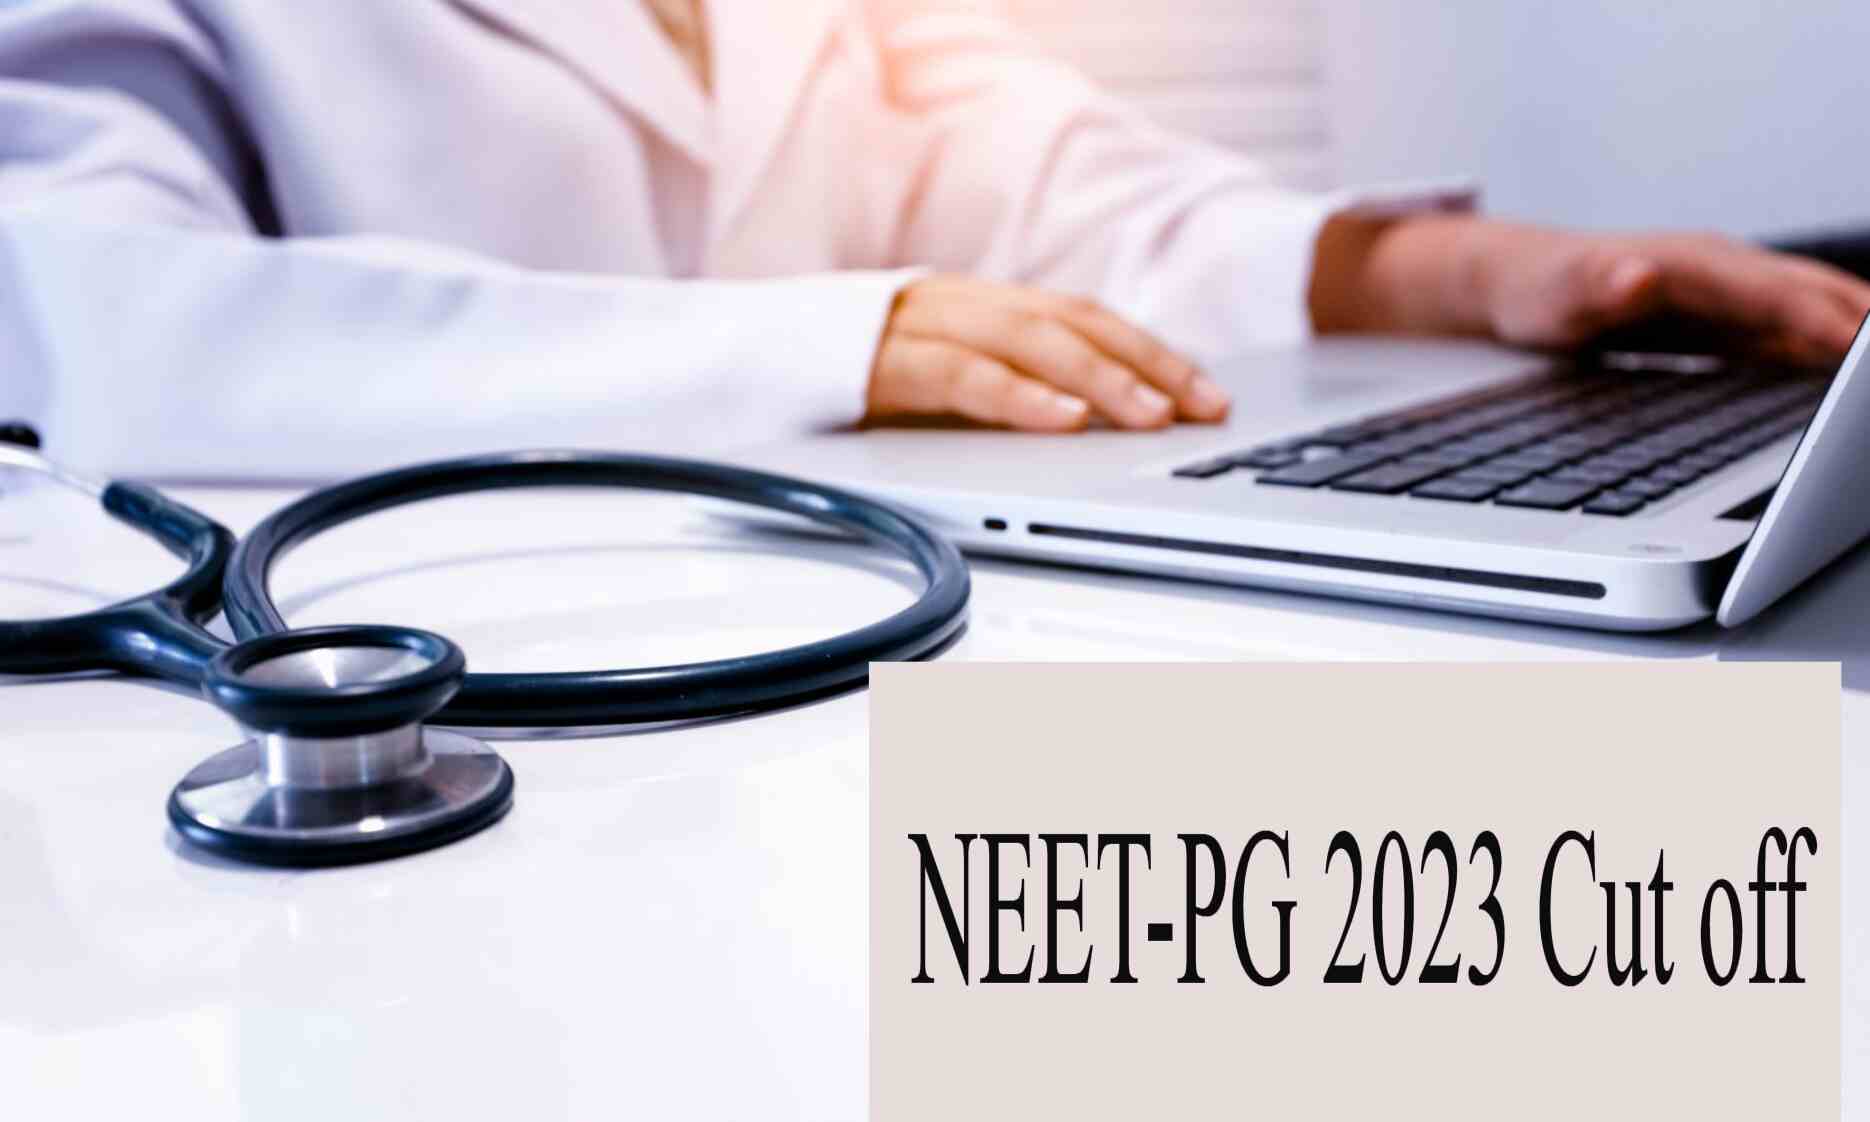 Health Ministry reduces NEET PG 2023 cut-off percentile to ZERO